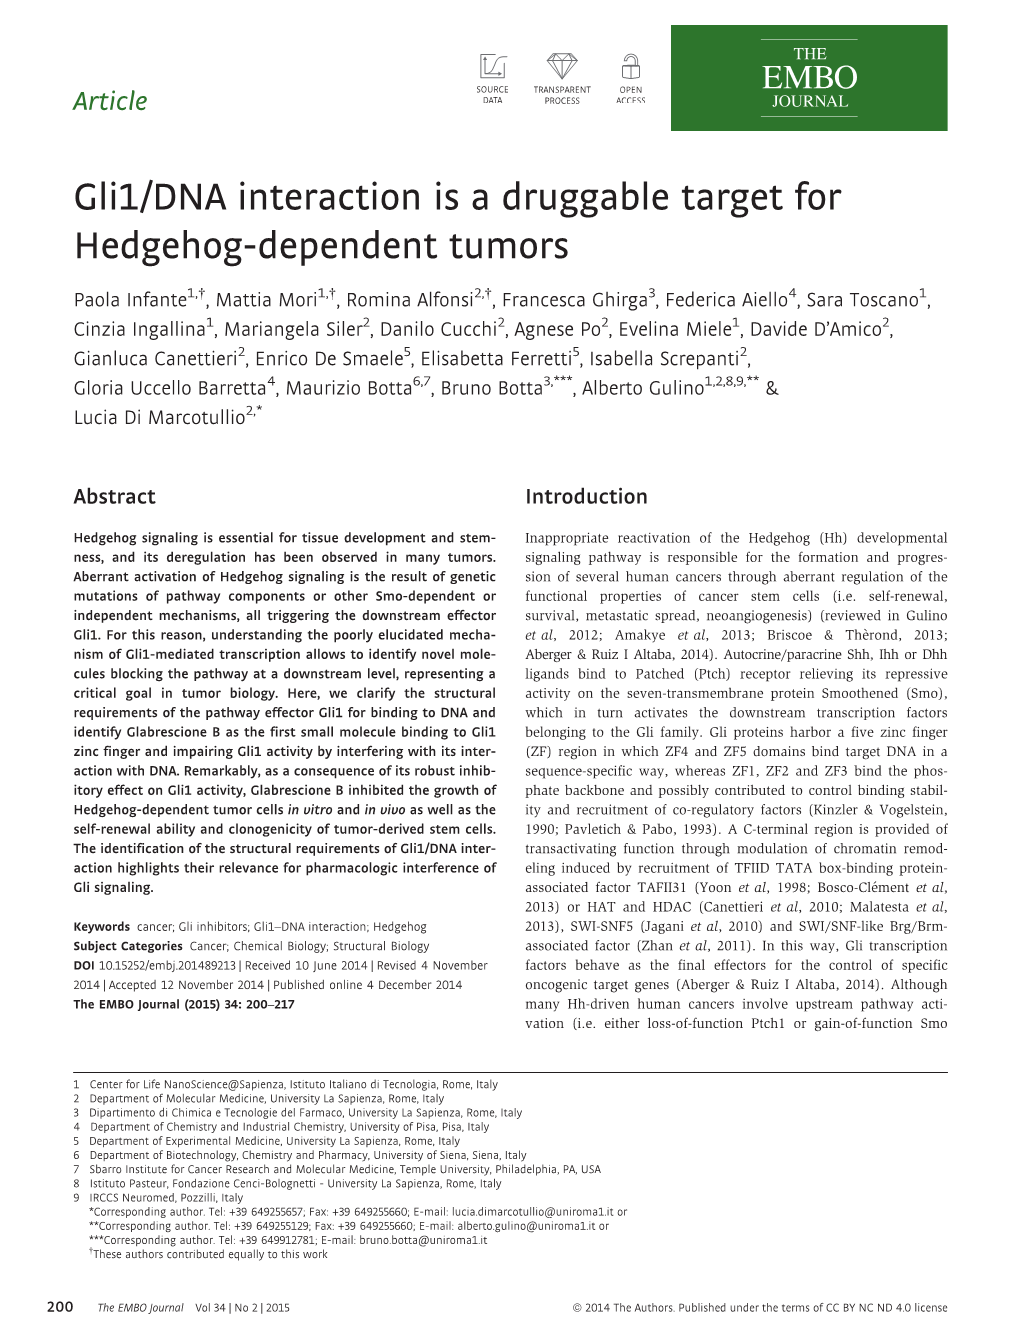 Gli1/DNA Interaction Is a Druggable Target for Hedgehog‐Dependent